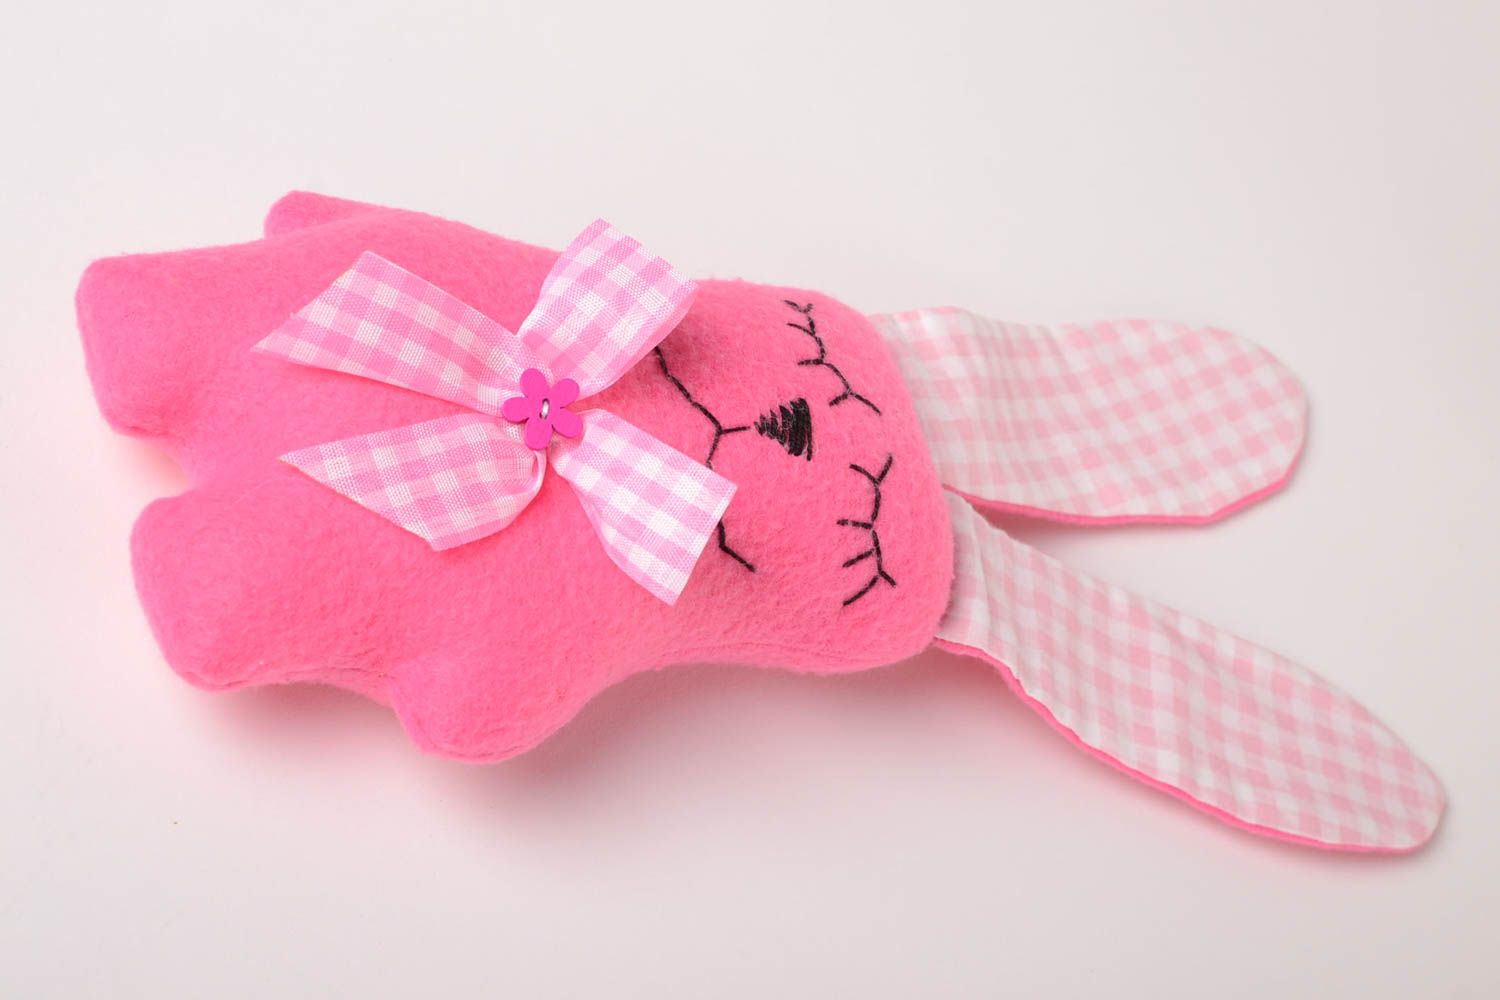 Handmade designer pink toy textile bright cute toy stylish present for kids photo 3